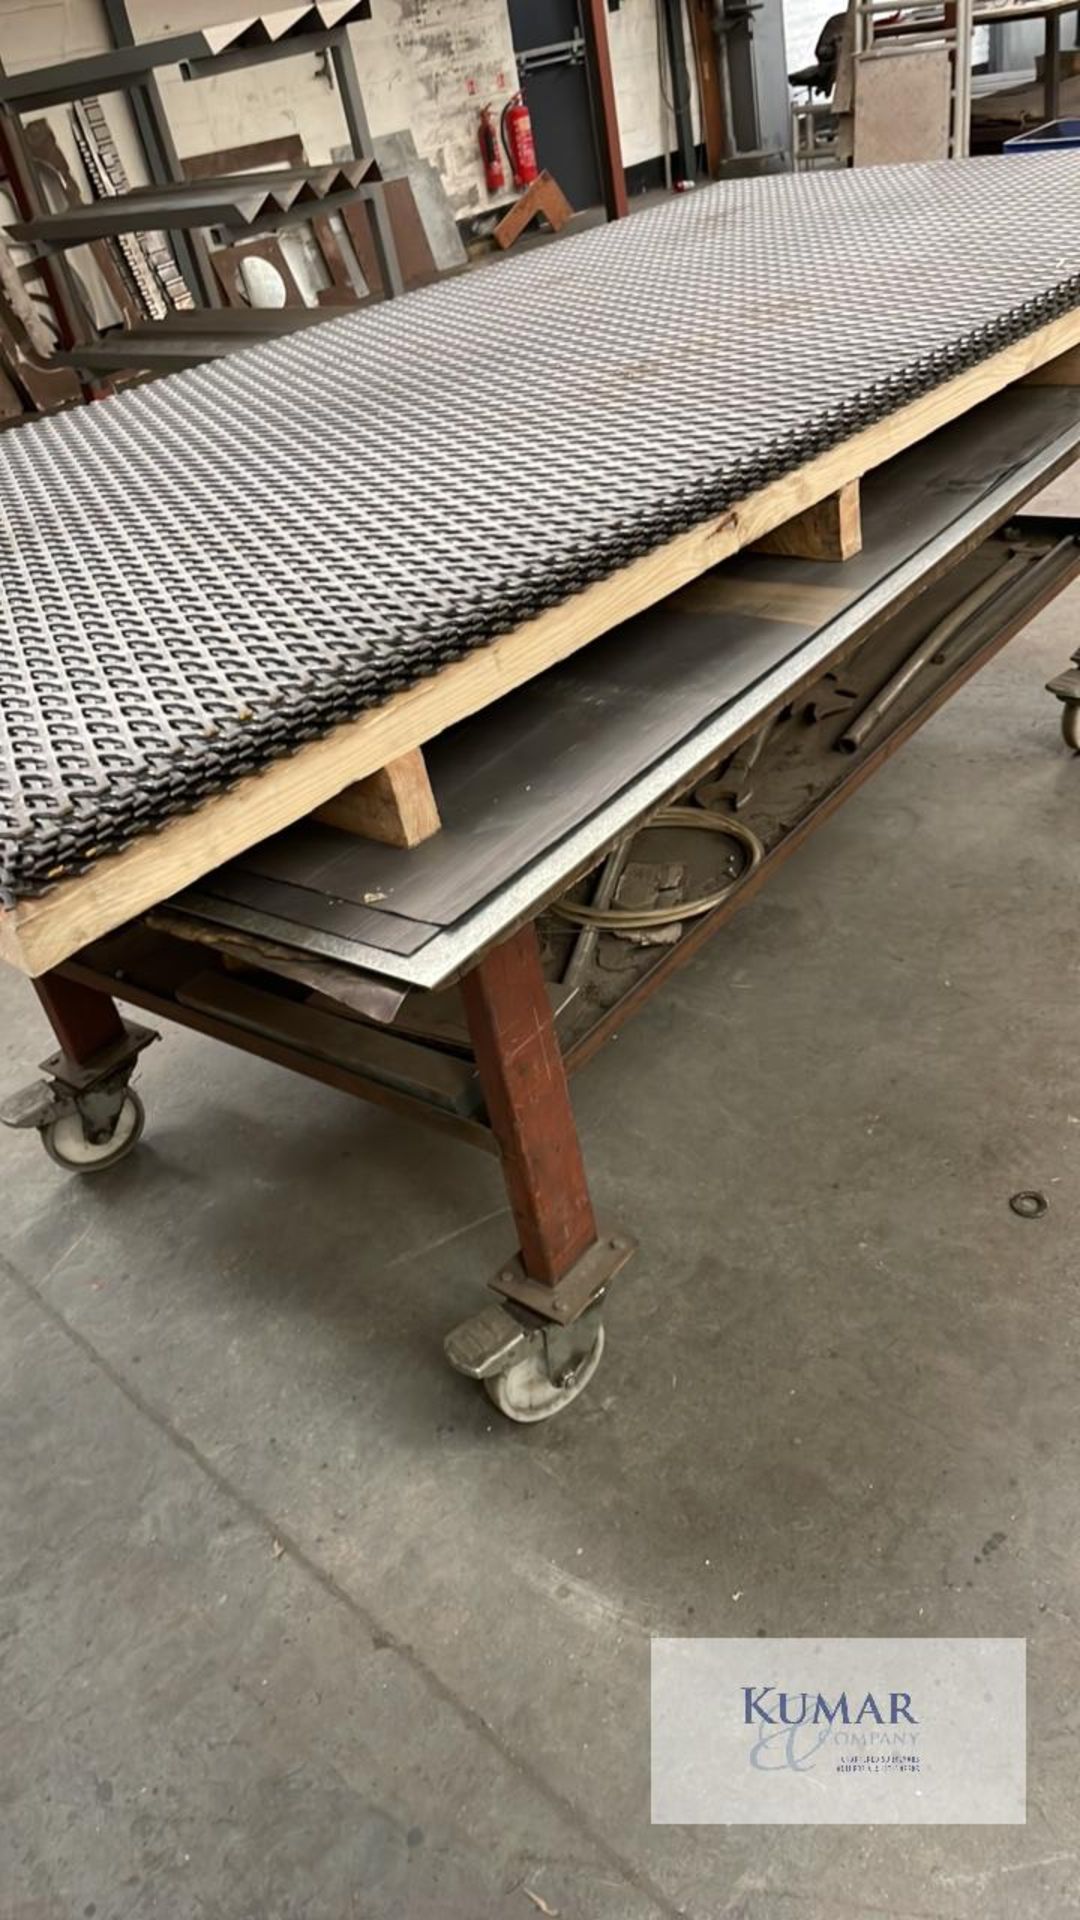 Sheet metal table on casters 1840mm long x 920mm wide 800mm high, with lower shelf Casters 150mm - Bild 2 aus 4